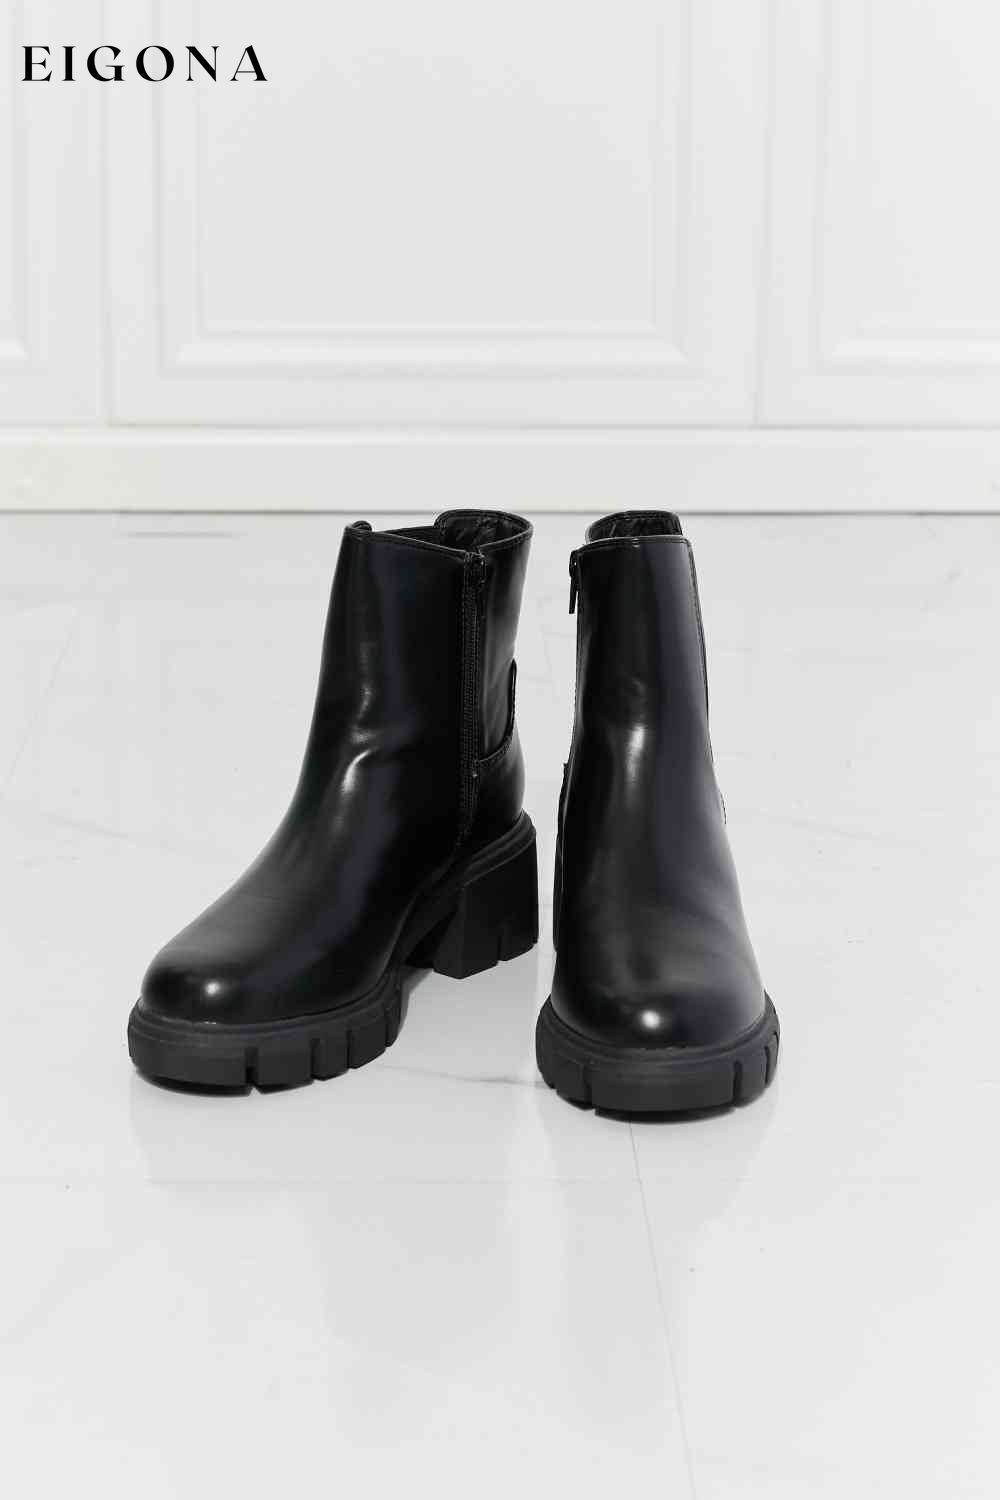 Black Booties, Shoes What It Takes Lug Sole Chelsea Boots in Black Melody Ship from USA shoes womens shoes